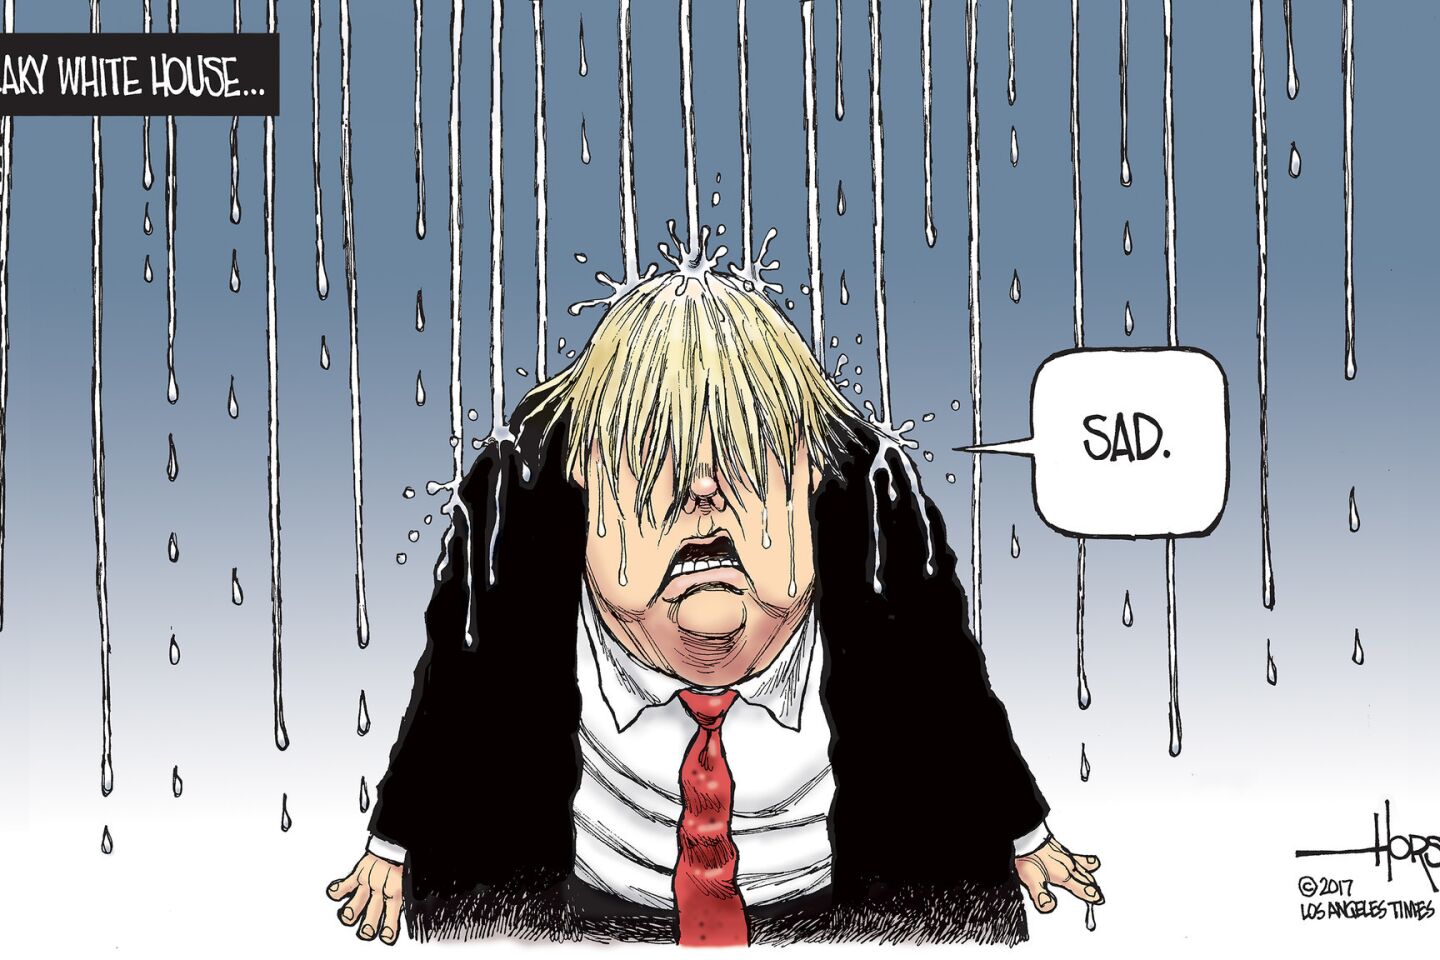 Donald Trump is drenched by leaks.